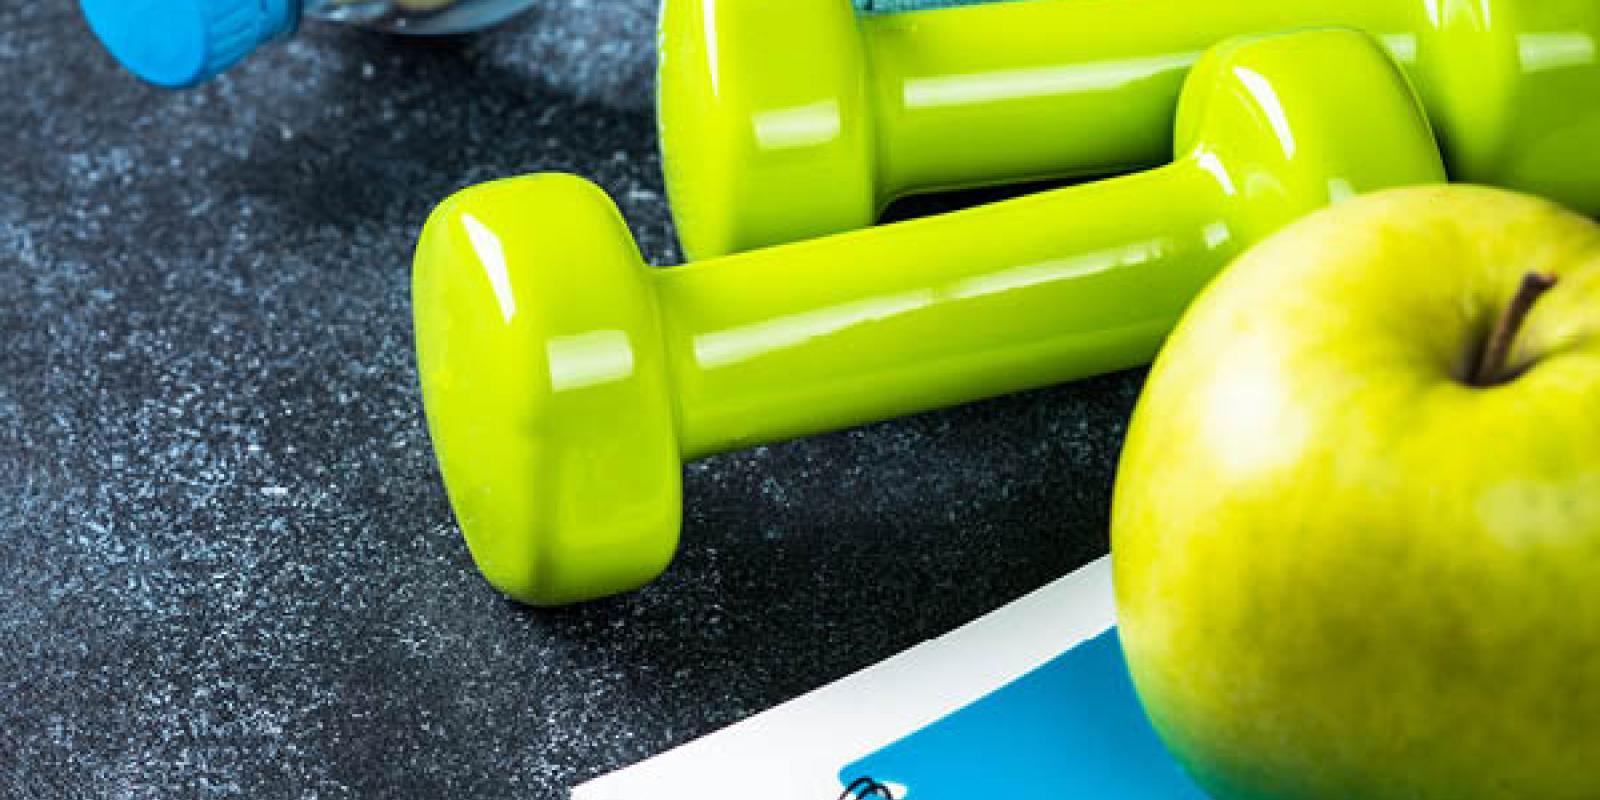 apple, dumbell and water bottle